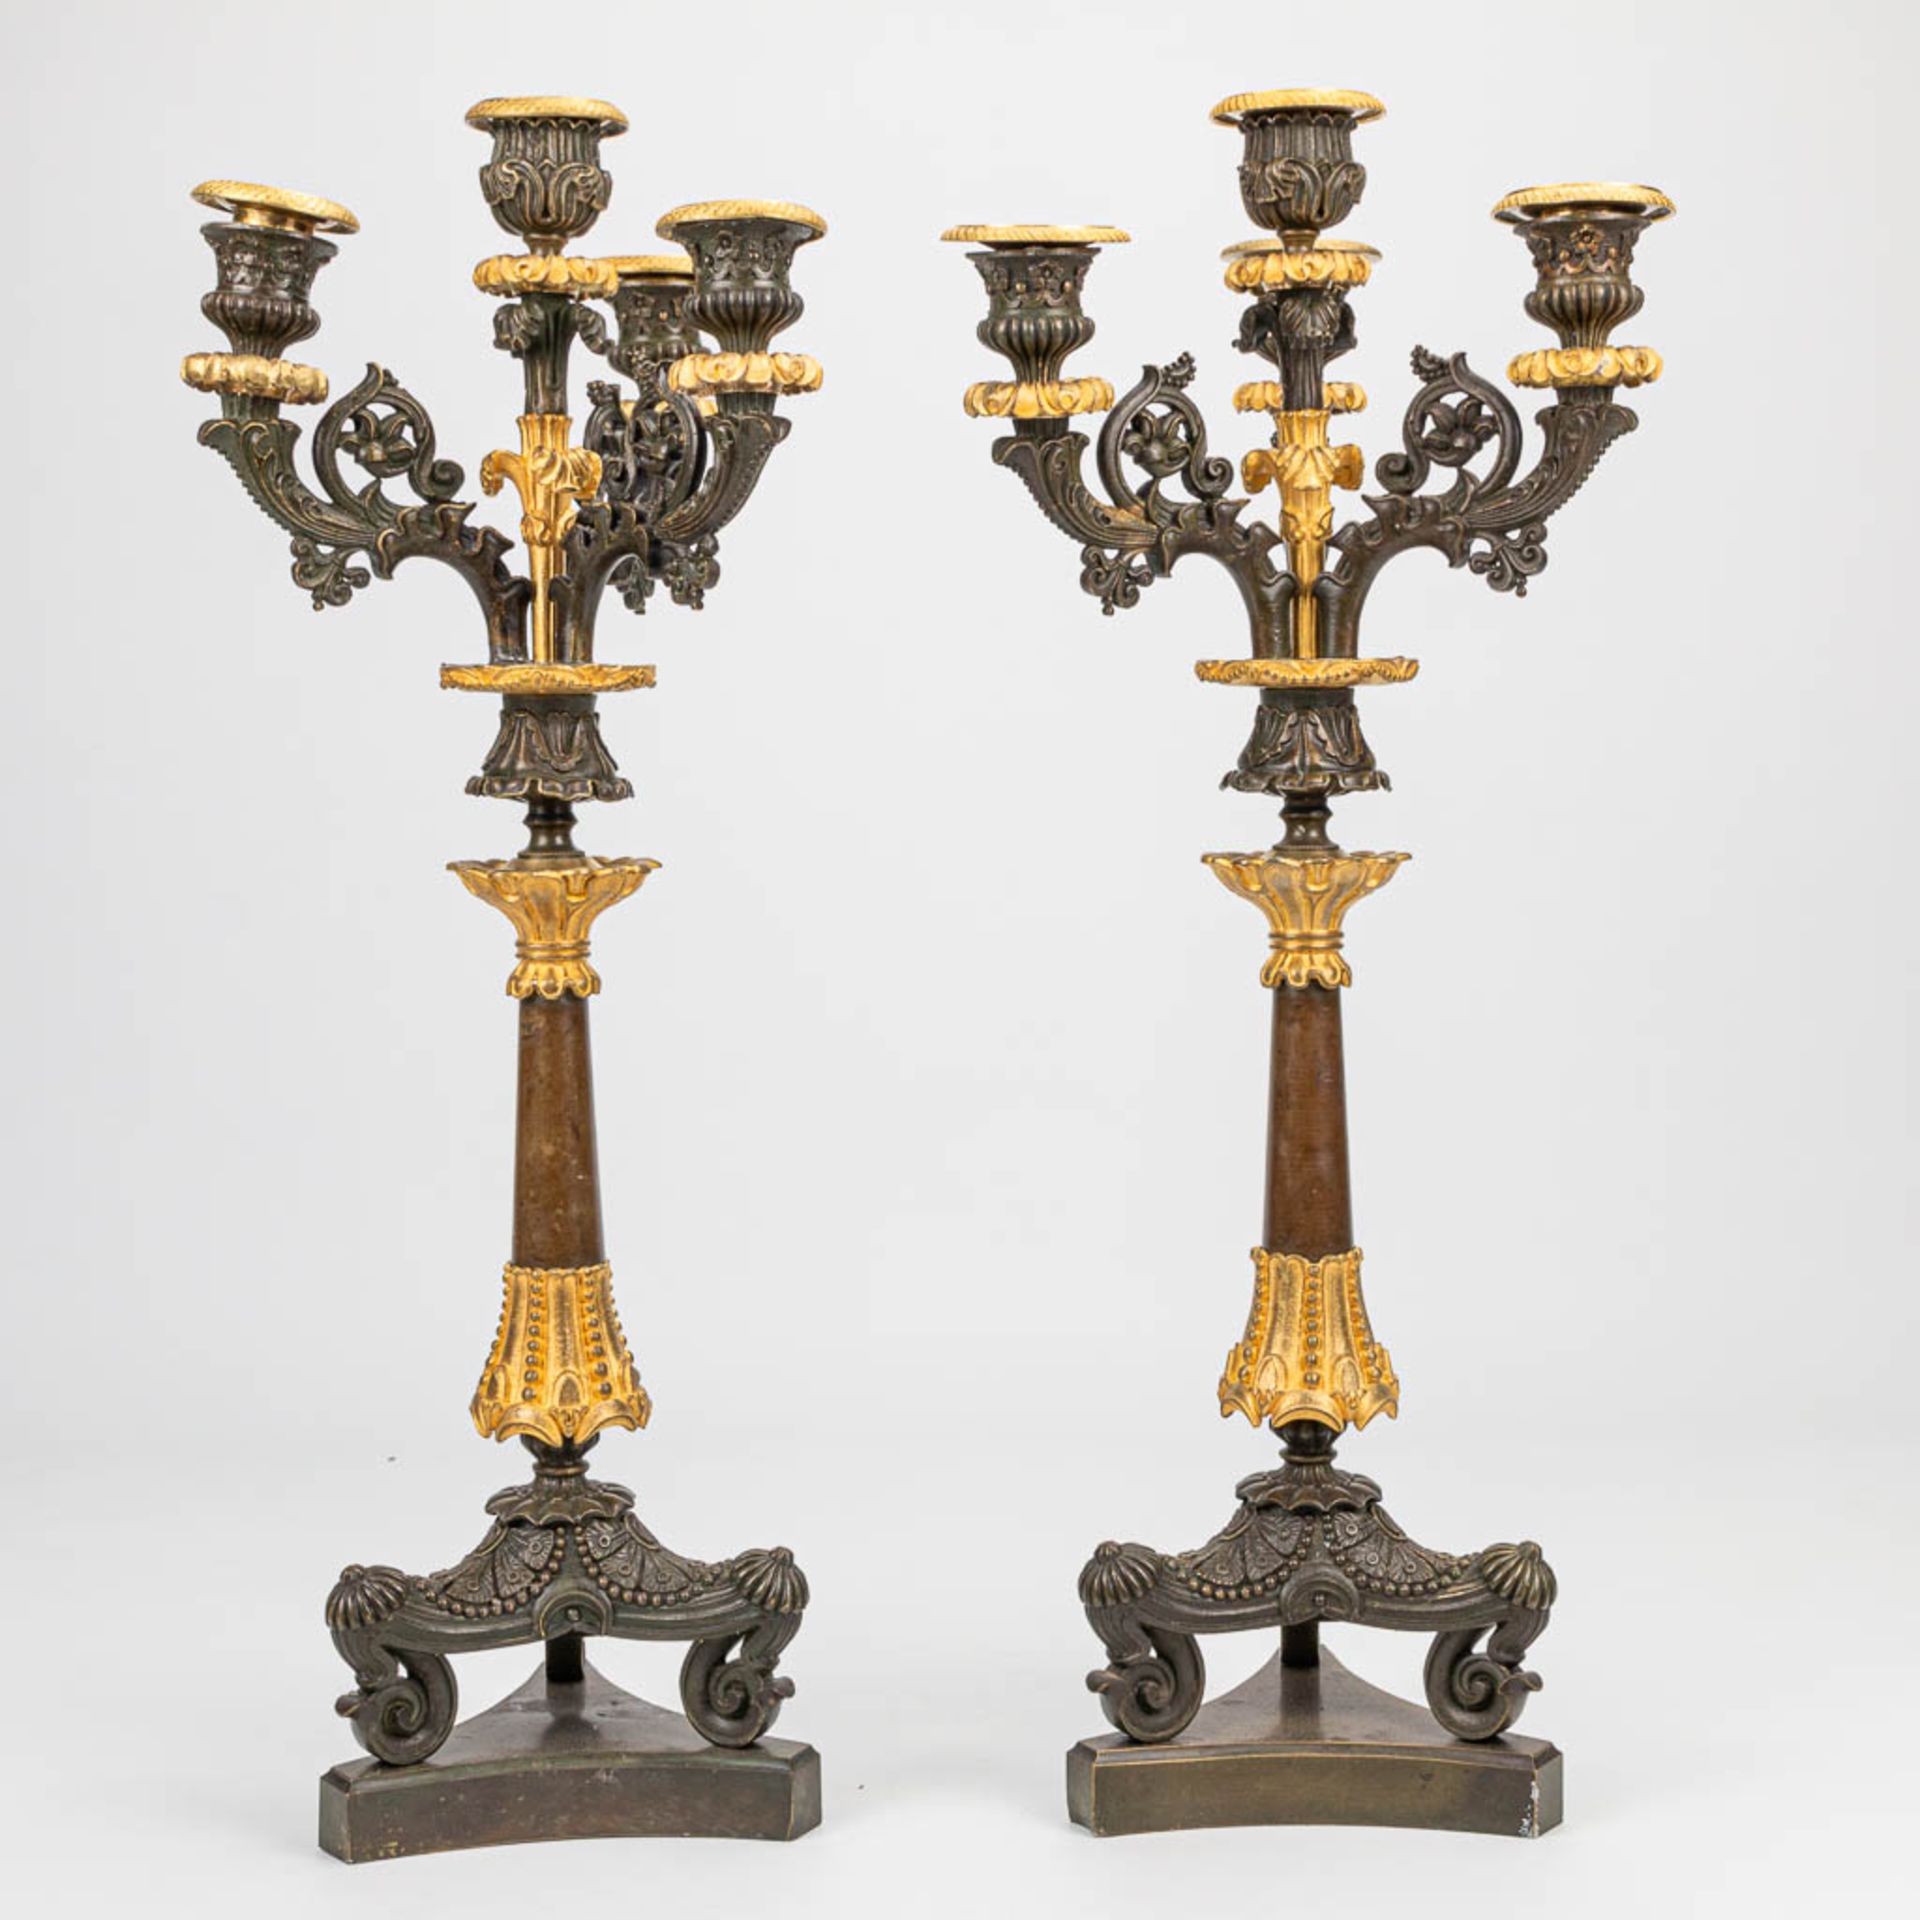 A pair of candelabra with gilt and patinated bronze in empire style, of the period. (16 x 20 x 51 cm